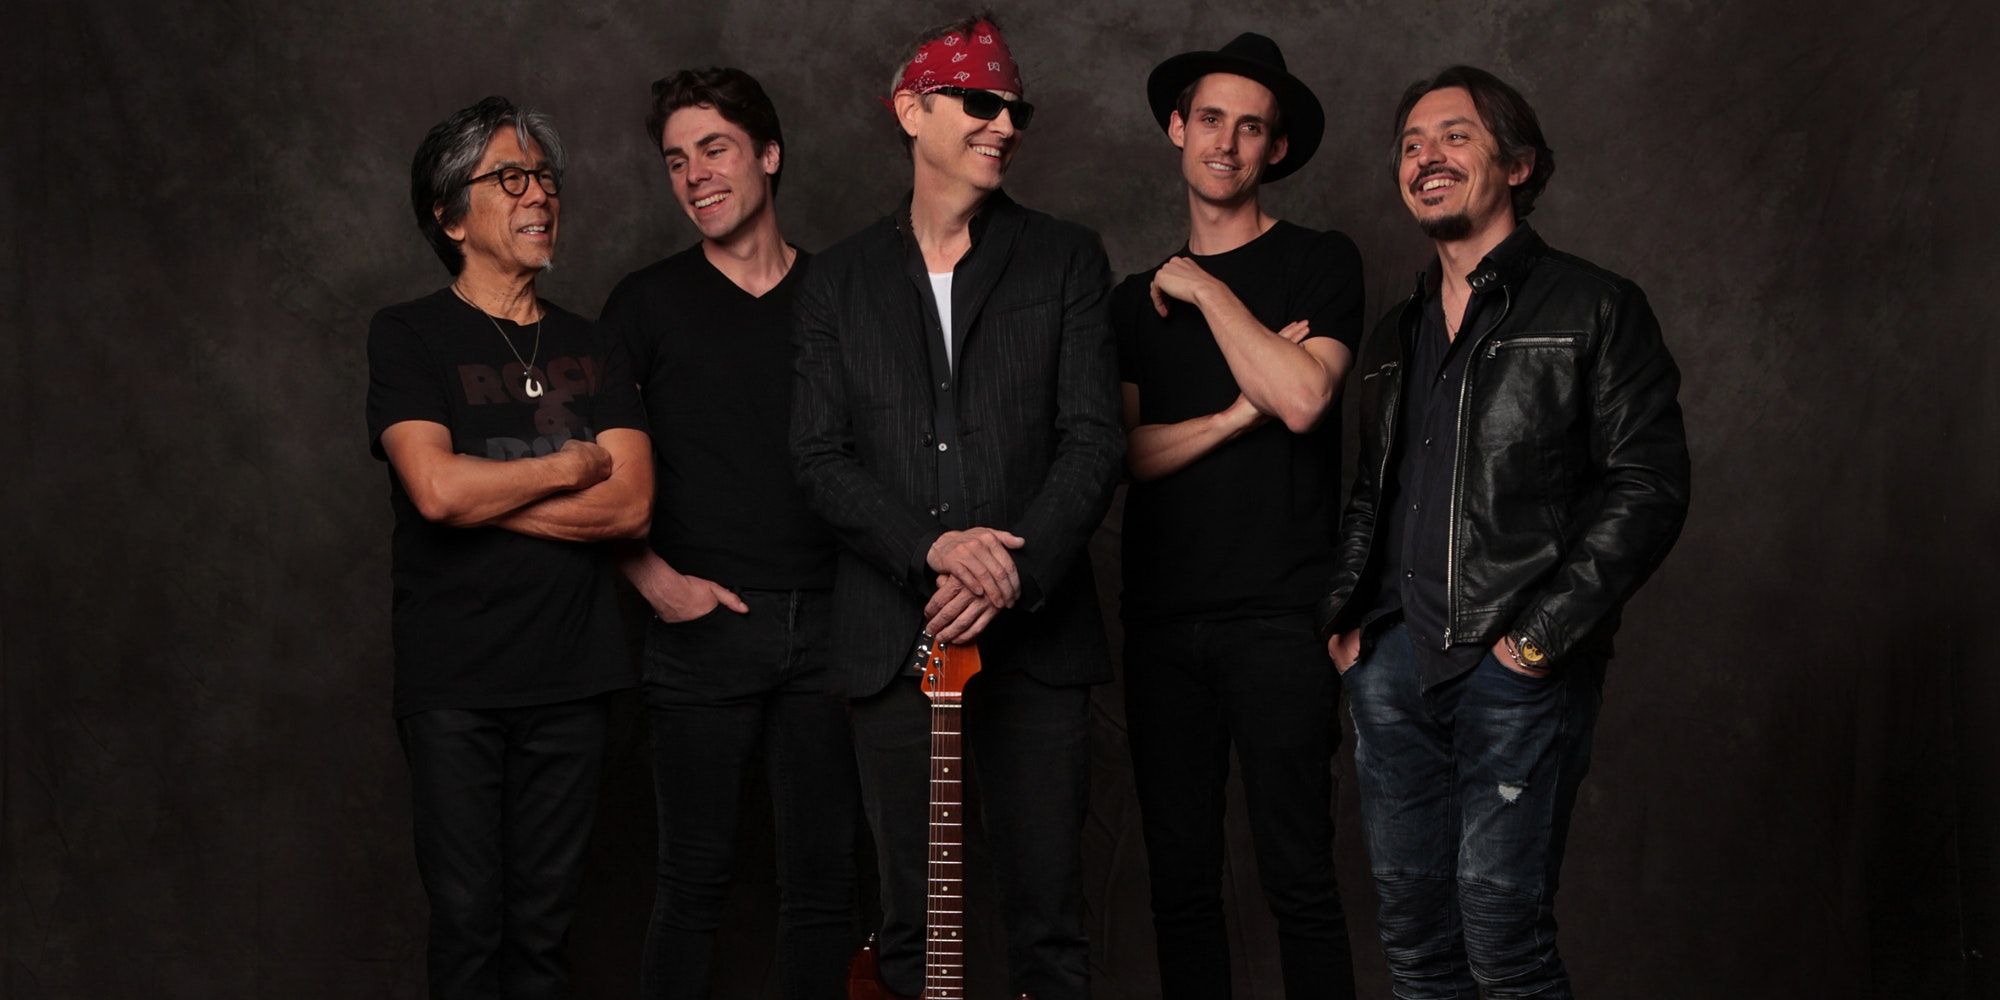 BoDeans LIVE at The Tin Pan promotional image